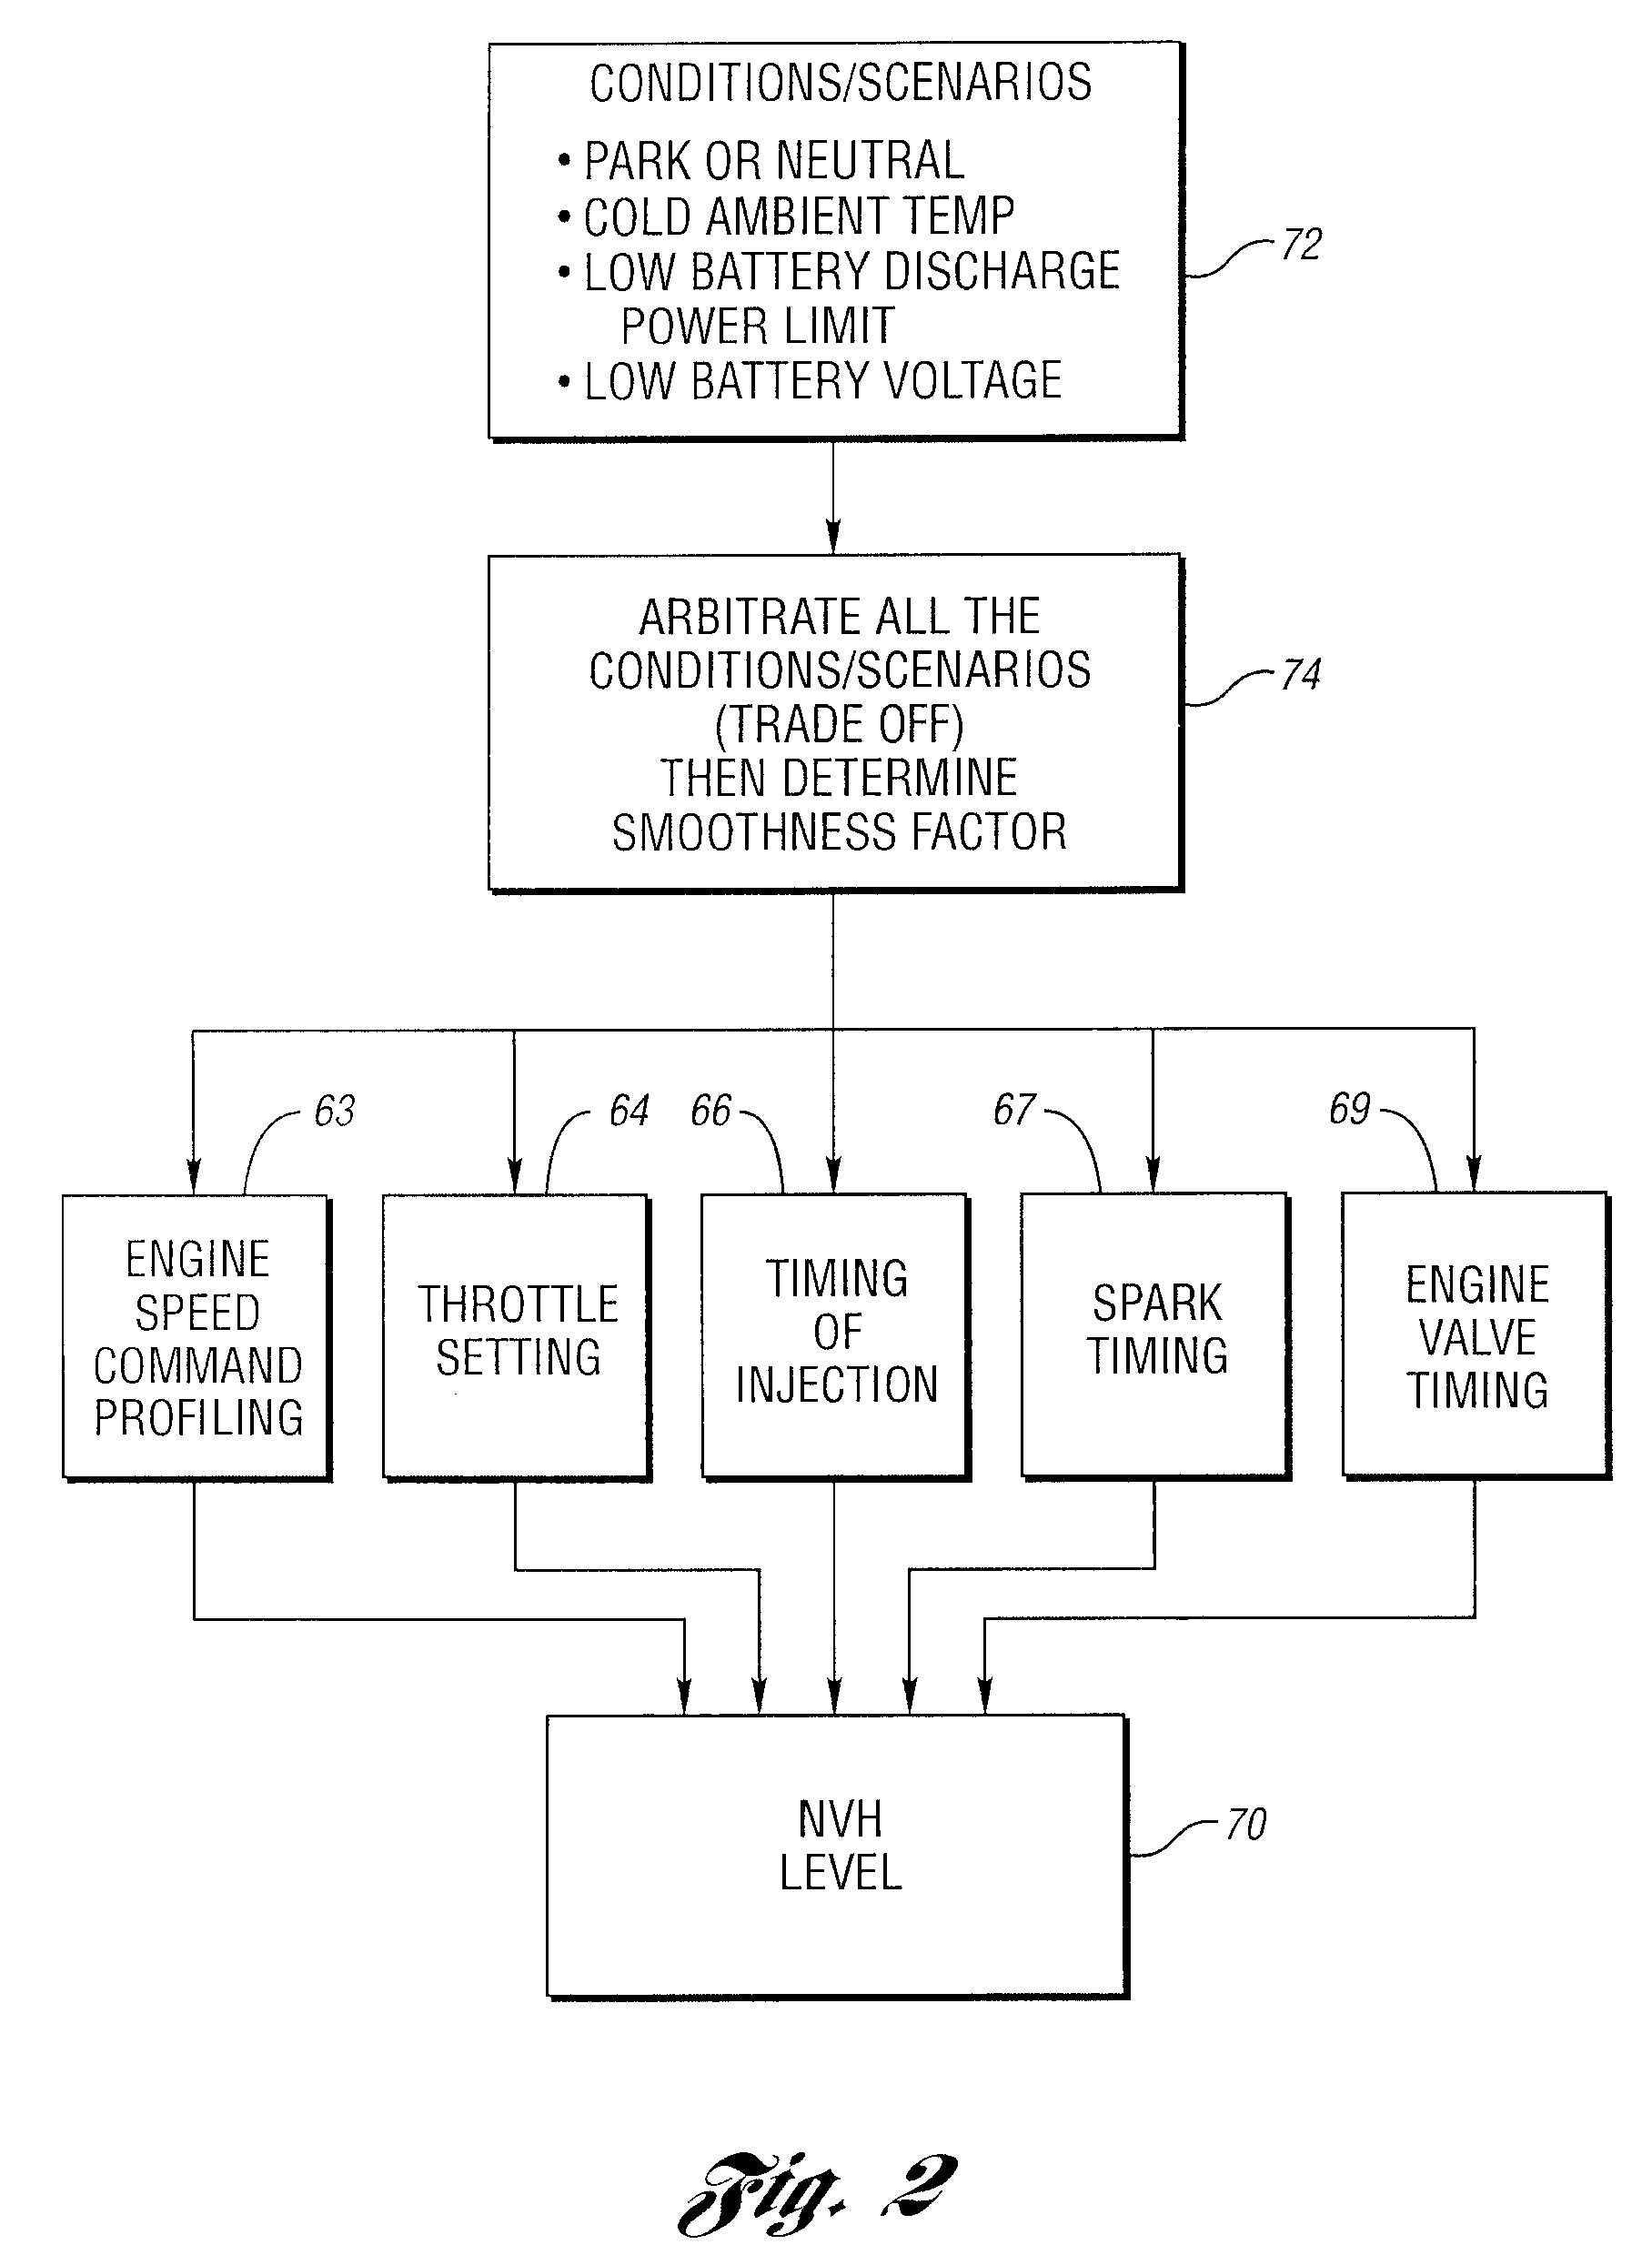 Method for controlling starting of an engine in a hybrid electric vehicle powertrain